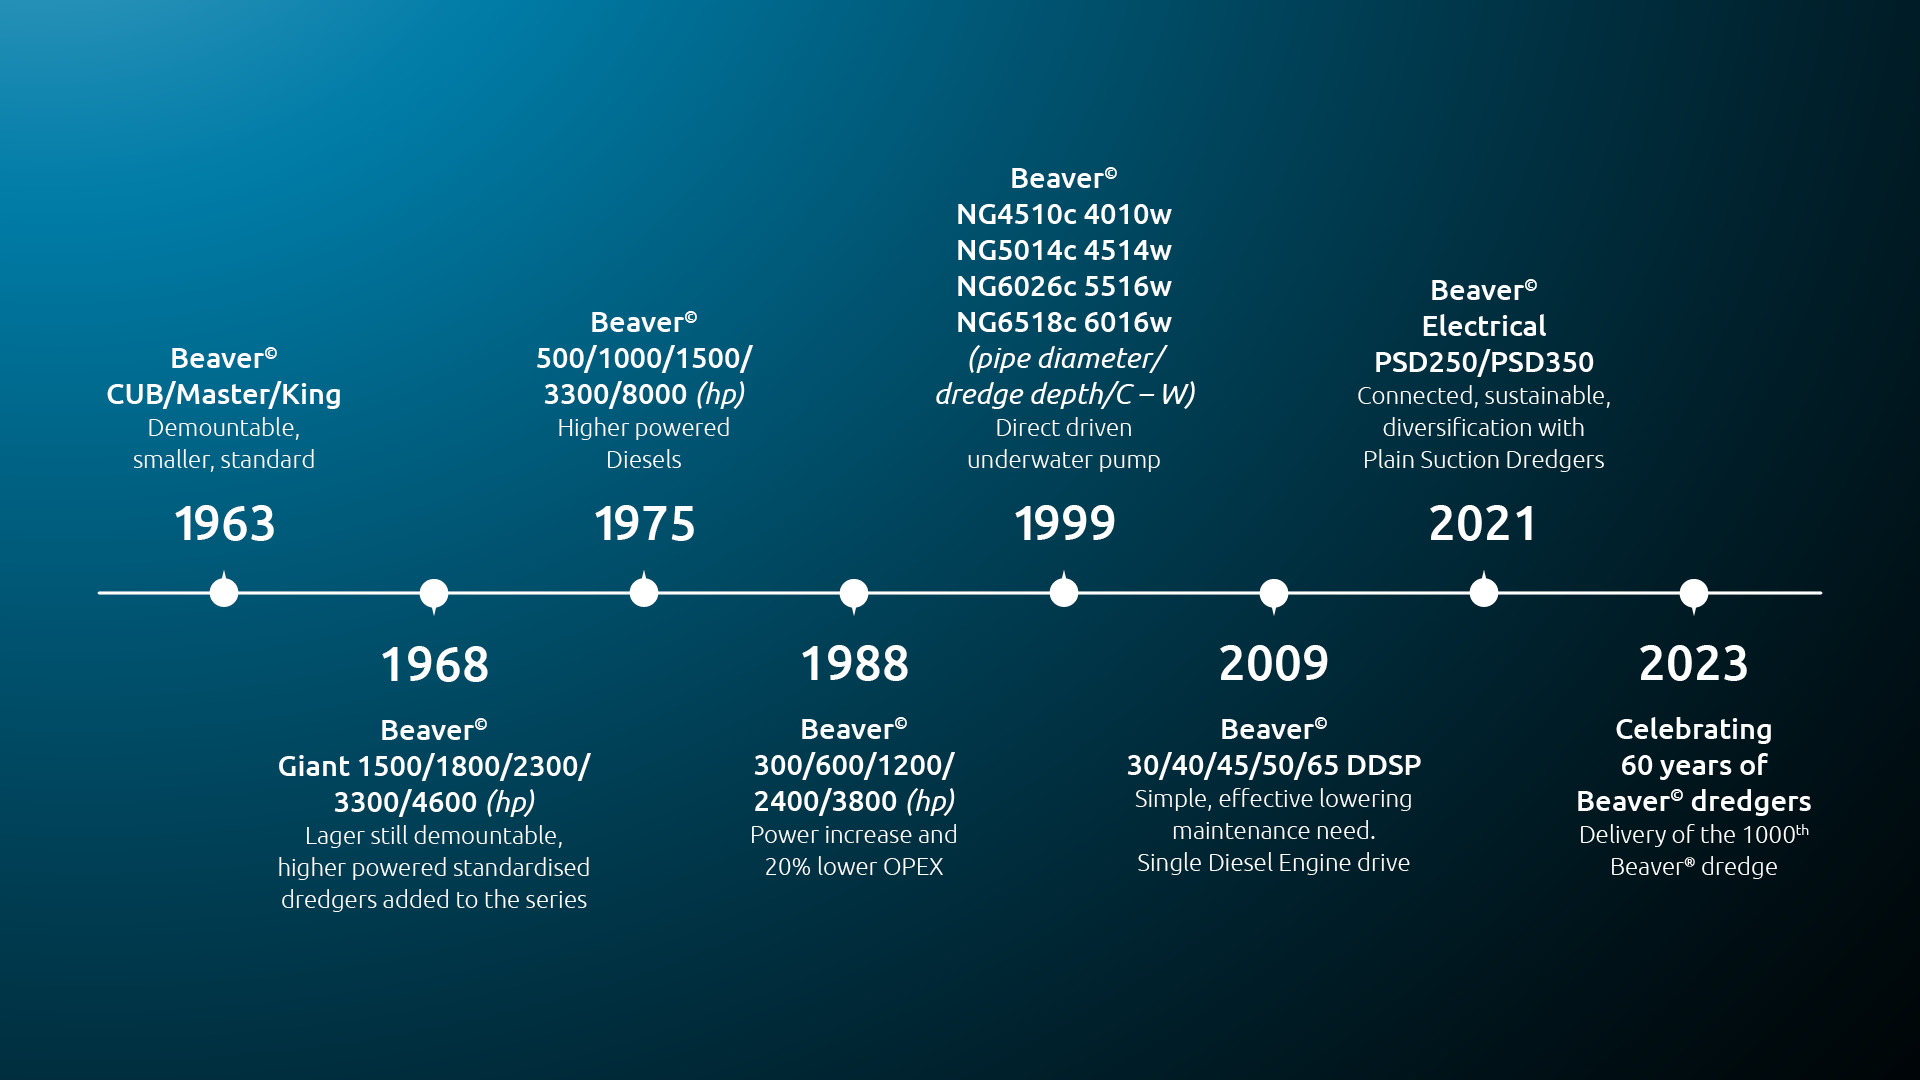 Historic overview of the innovations in our Beaver® vessels